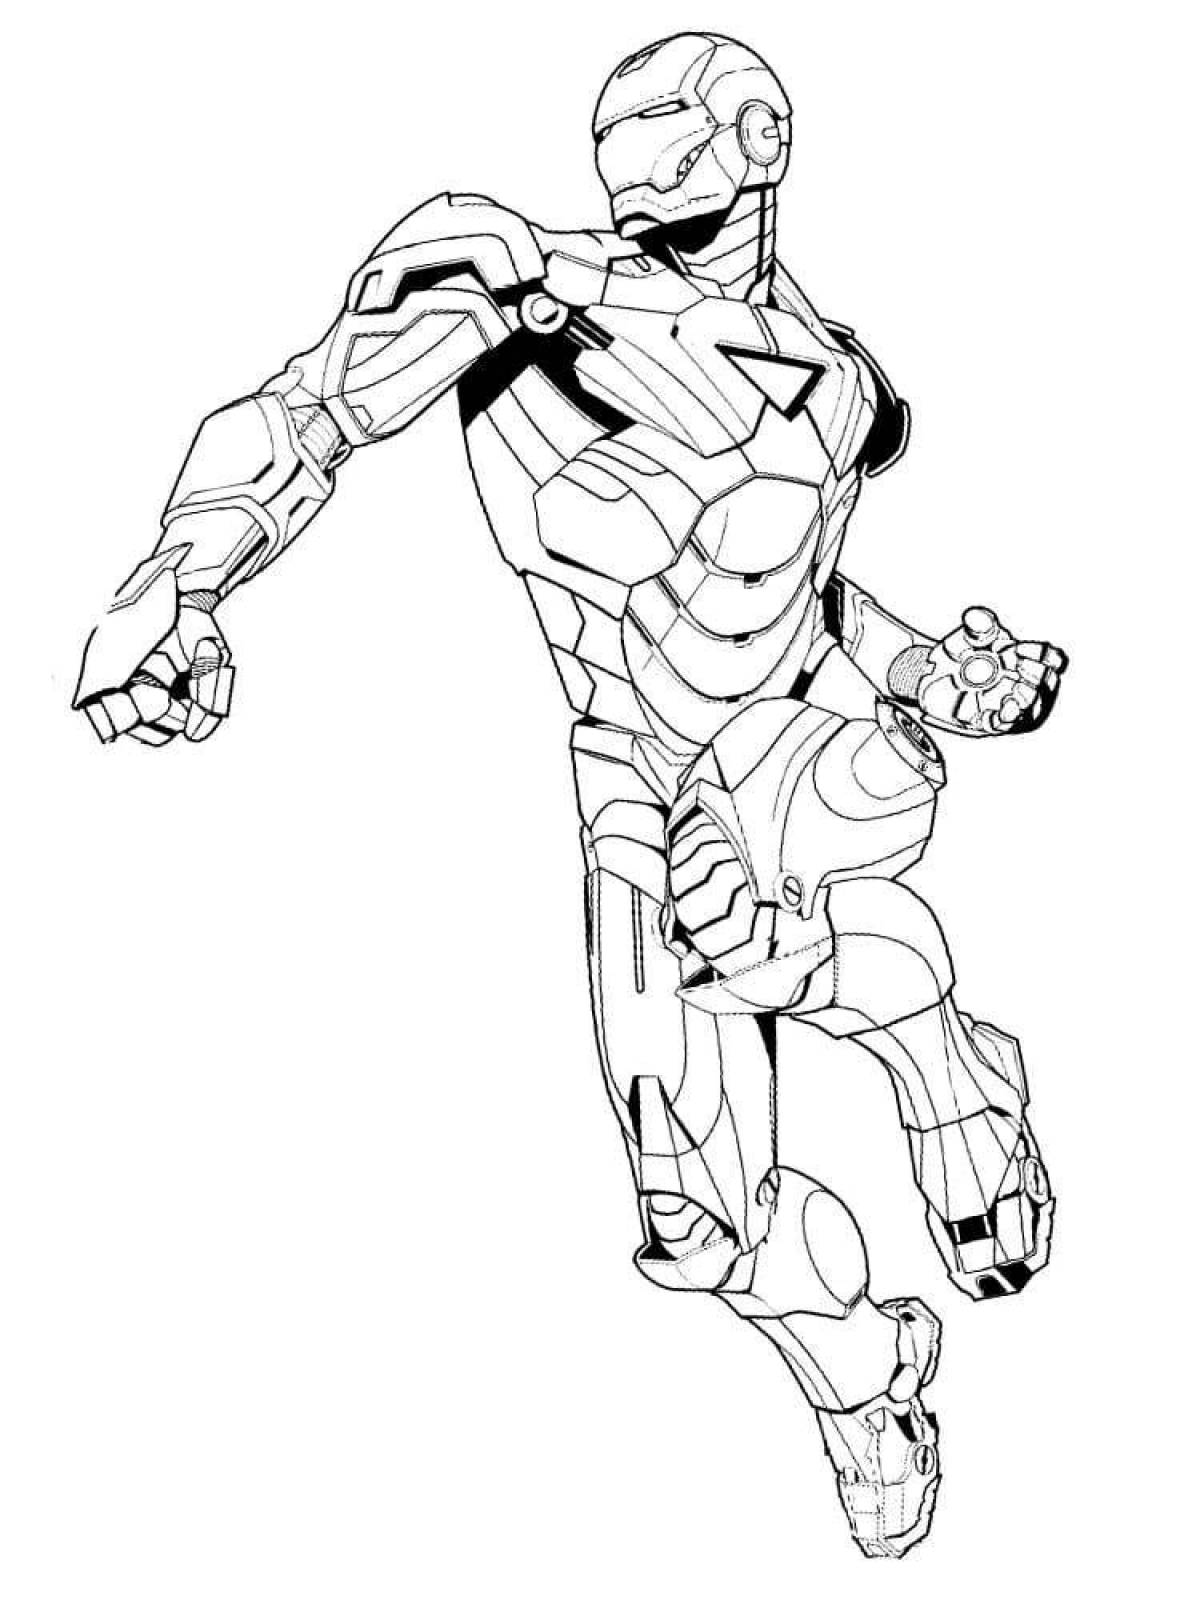 Glorious iron man coloring pages for kids